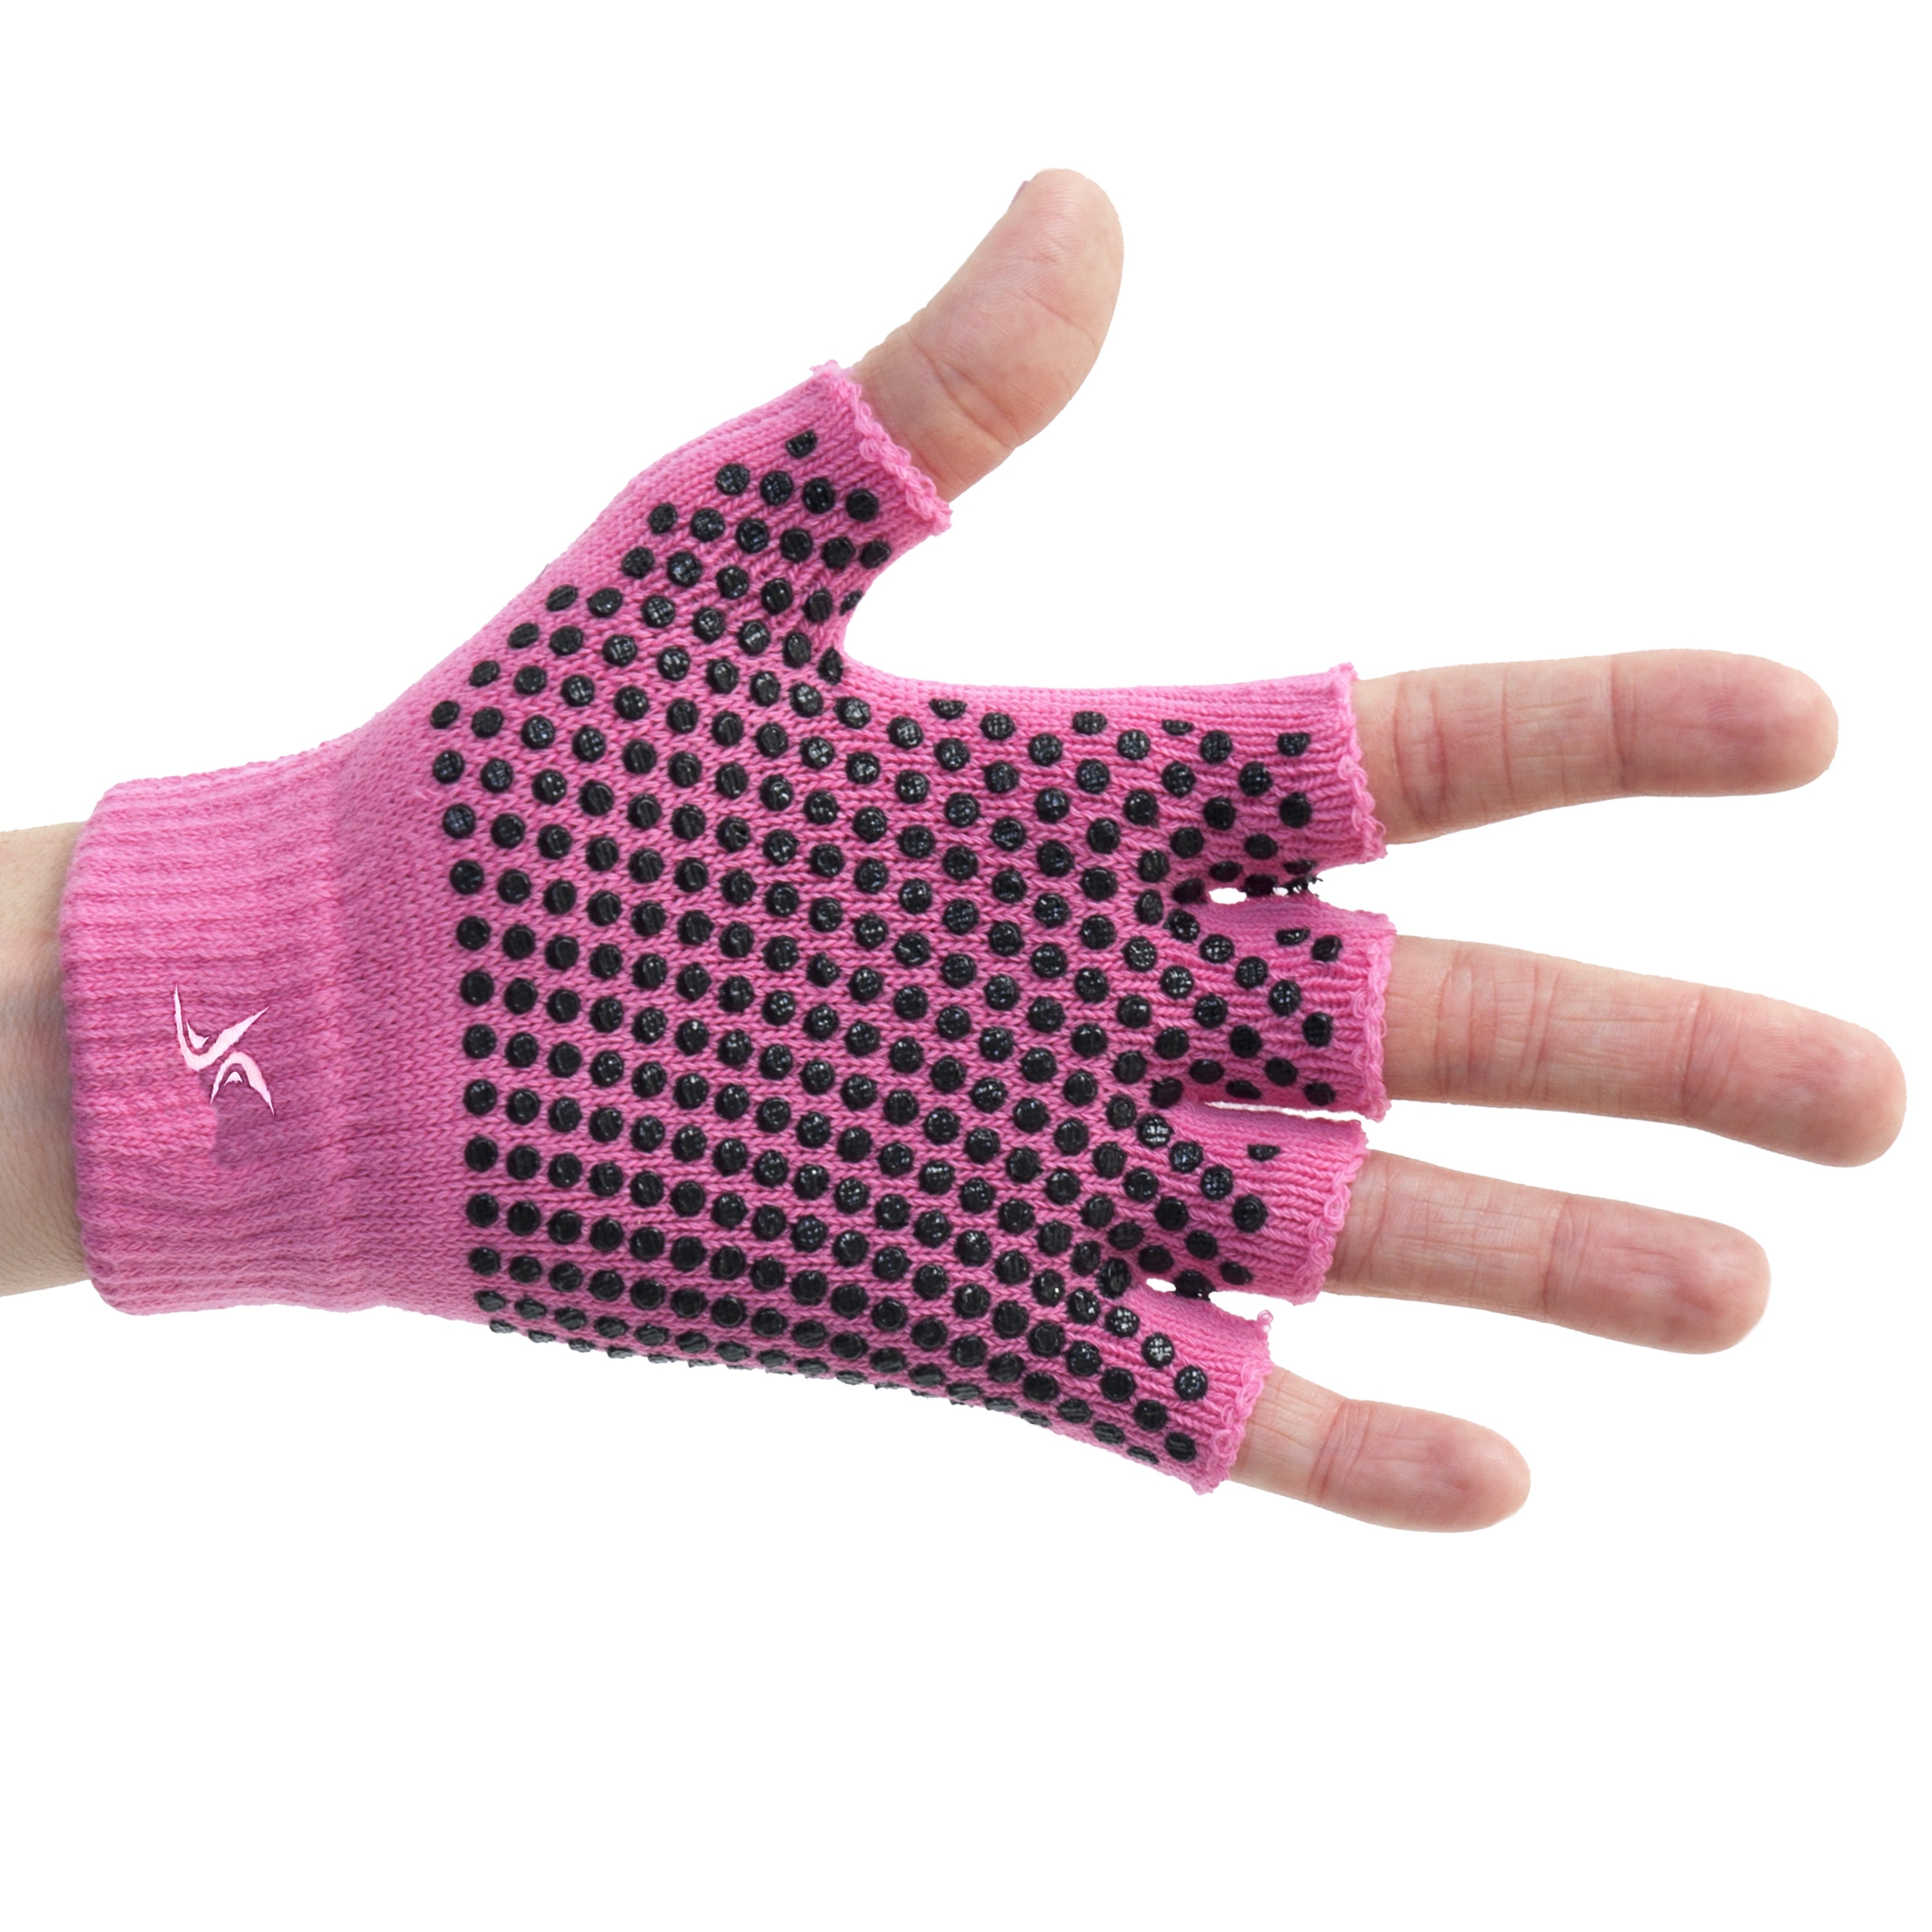 https://ak1.ostkcdn.com/images/products/is/images/direct/ba99fc41b23906f5e3a3677c8a90bc4ea5e72539/Grippy-Yoga-Gloves.jpg